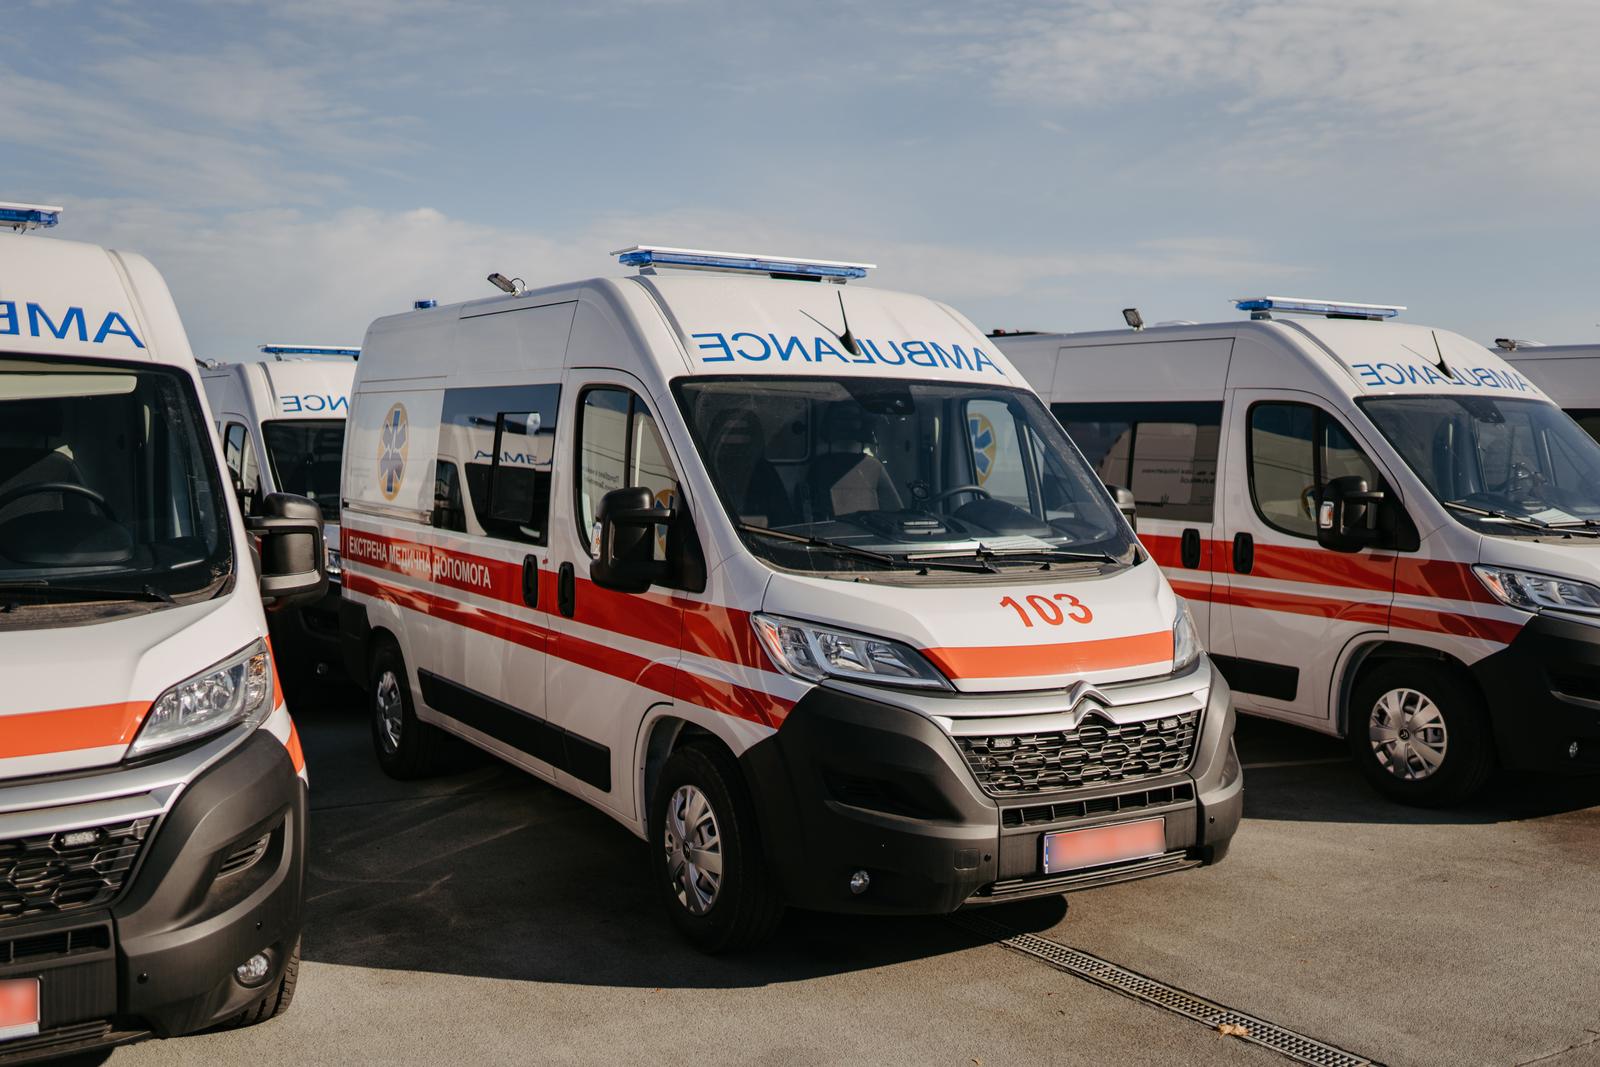 Another 15 ambulances from UNITED24 donors